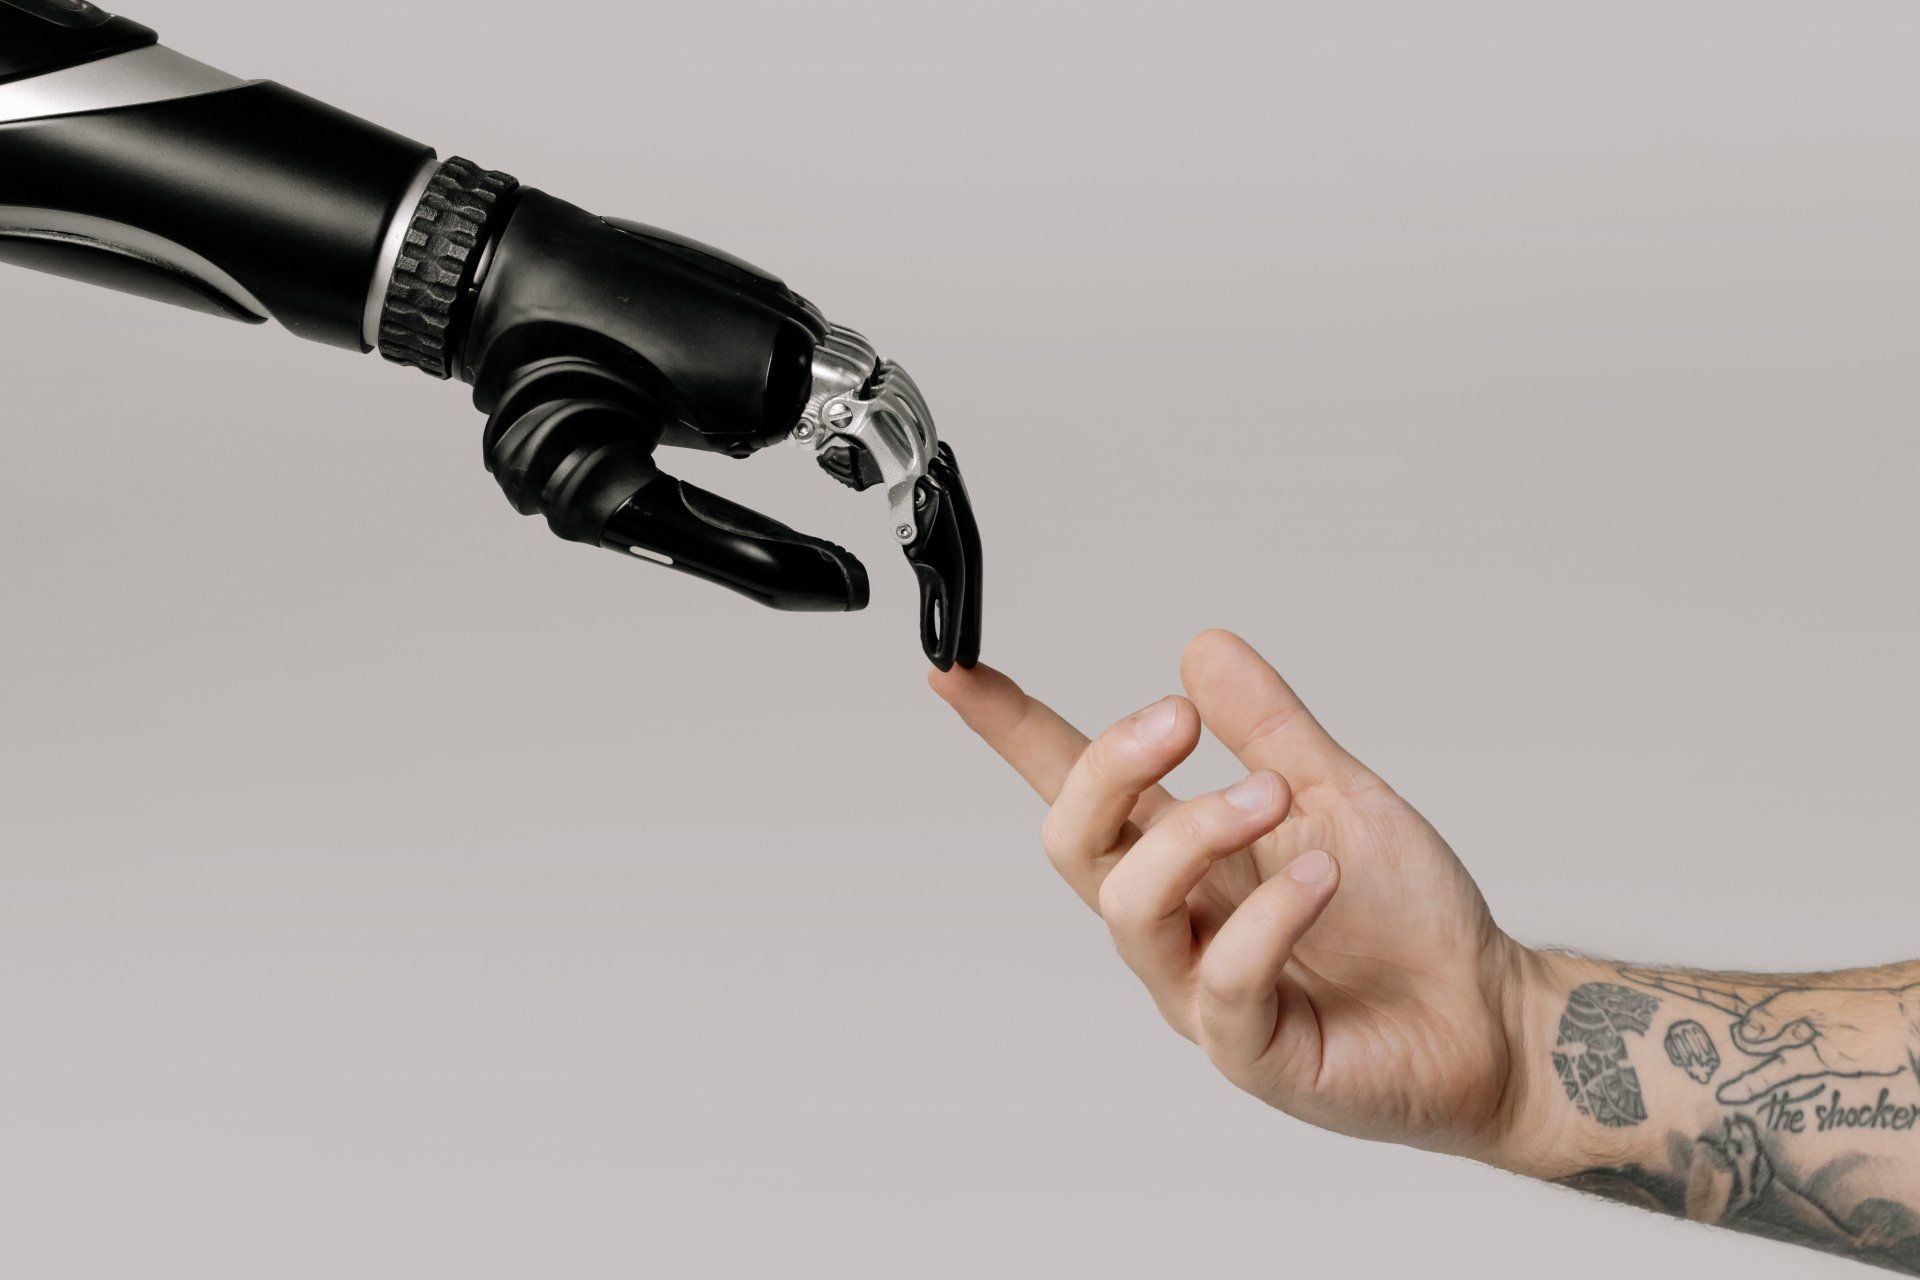 A robot hand touching a human hand in a warehouse setting.